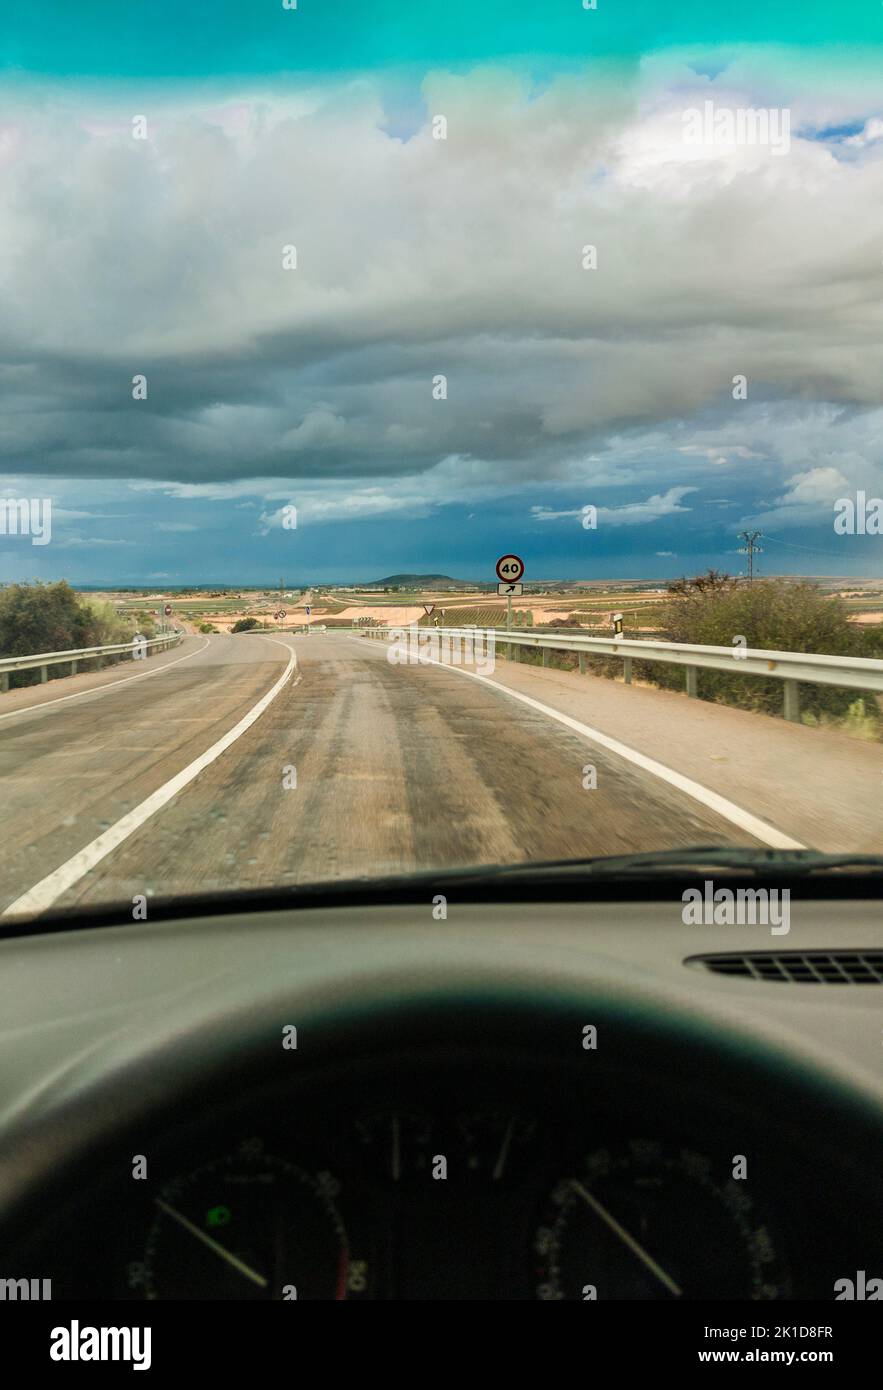 Driving under sunset stormy sky. View from the inside of the car Stock Photo